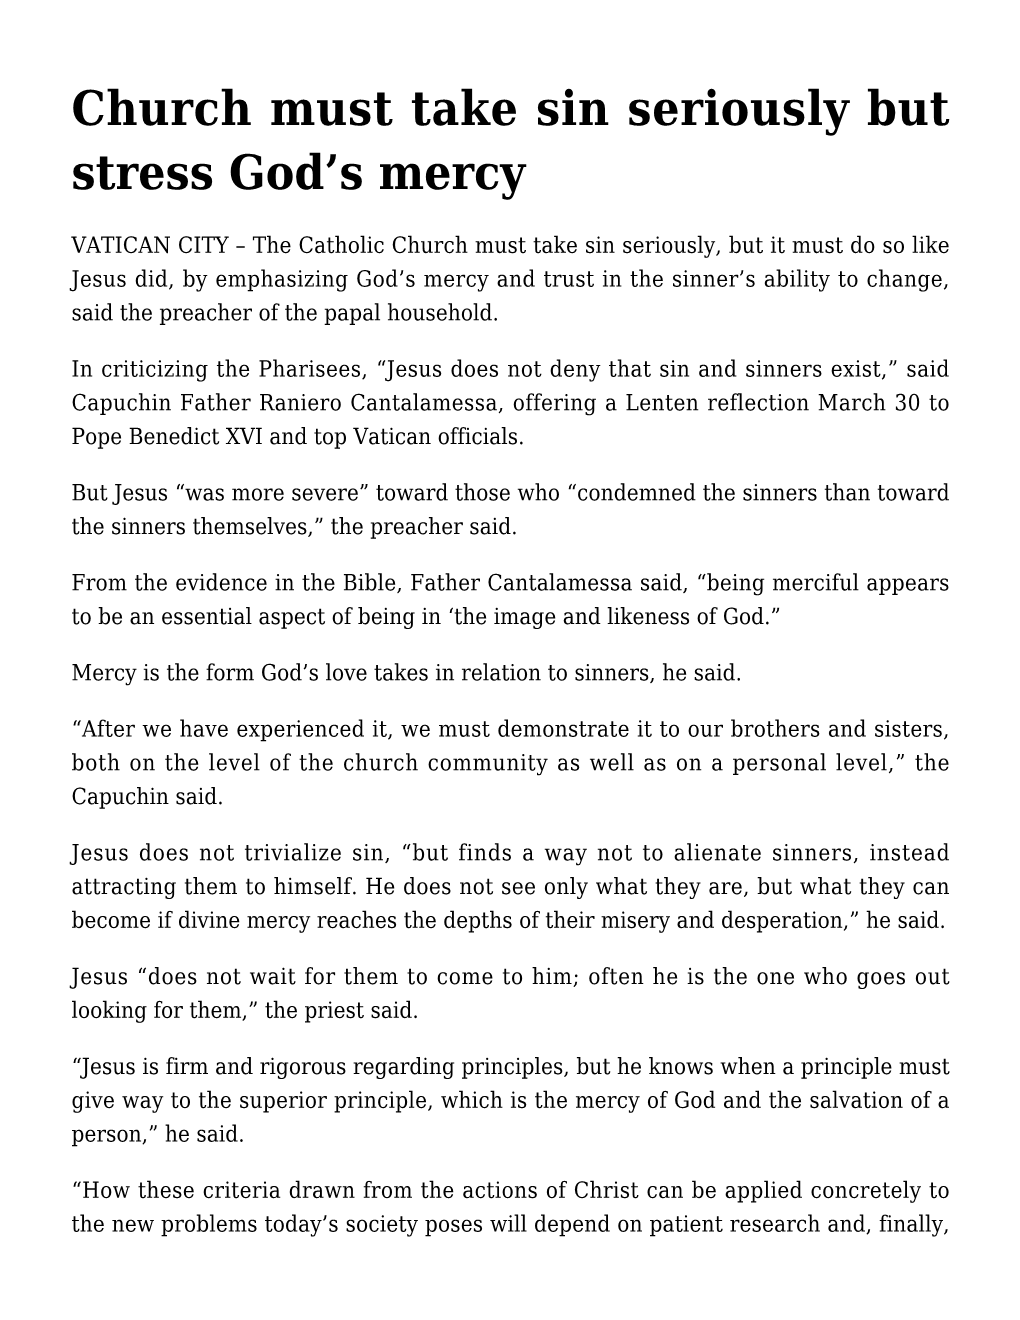 Church Must Take Sin Seriously but Stress God's Mercy